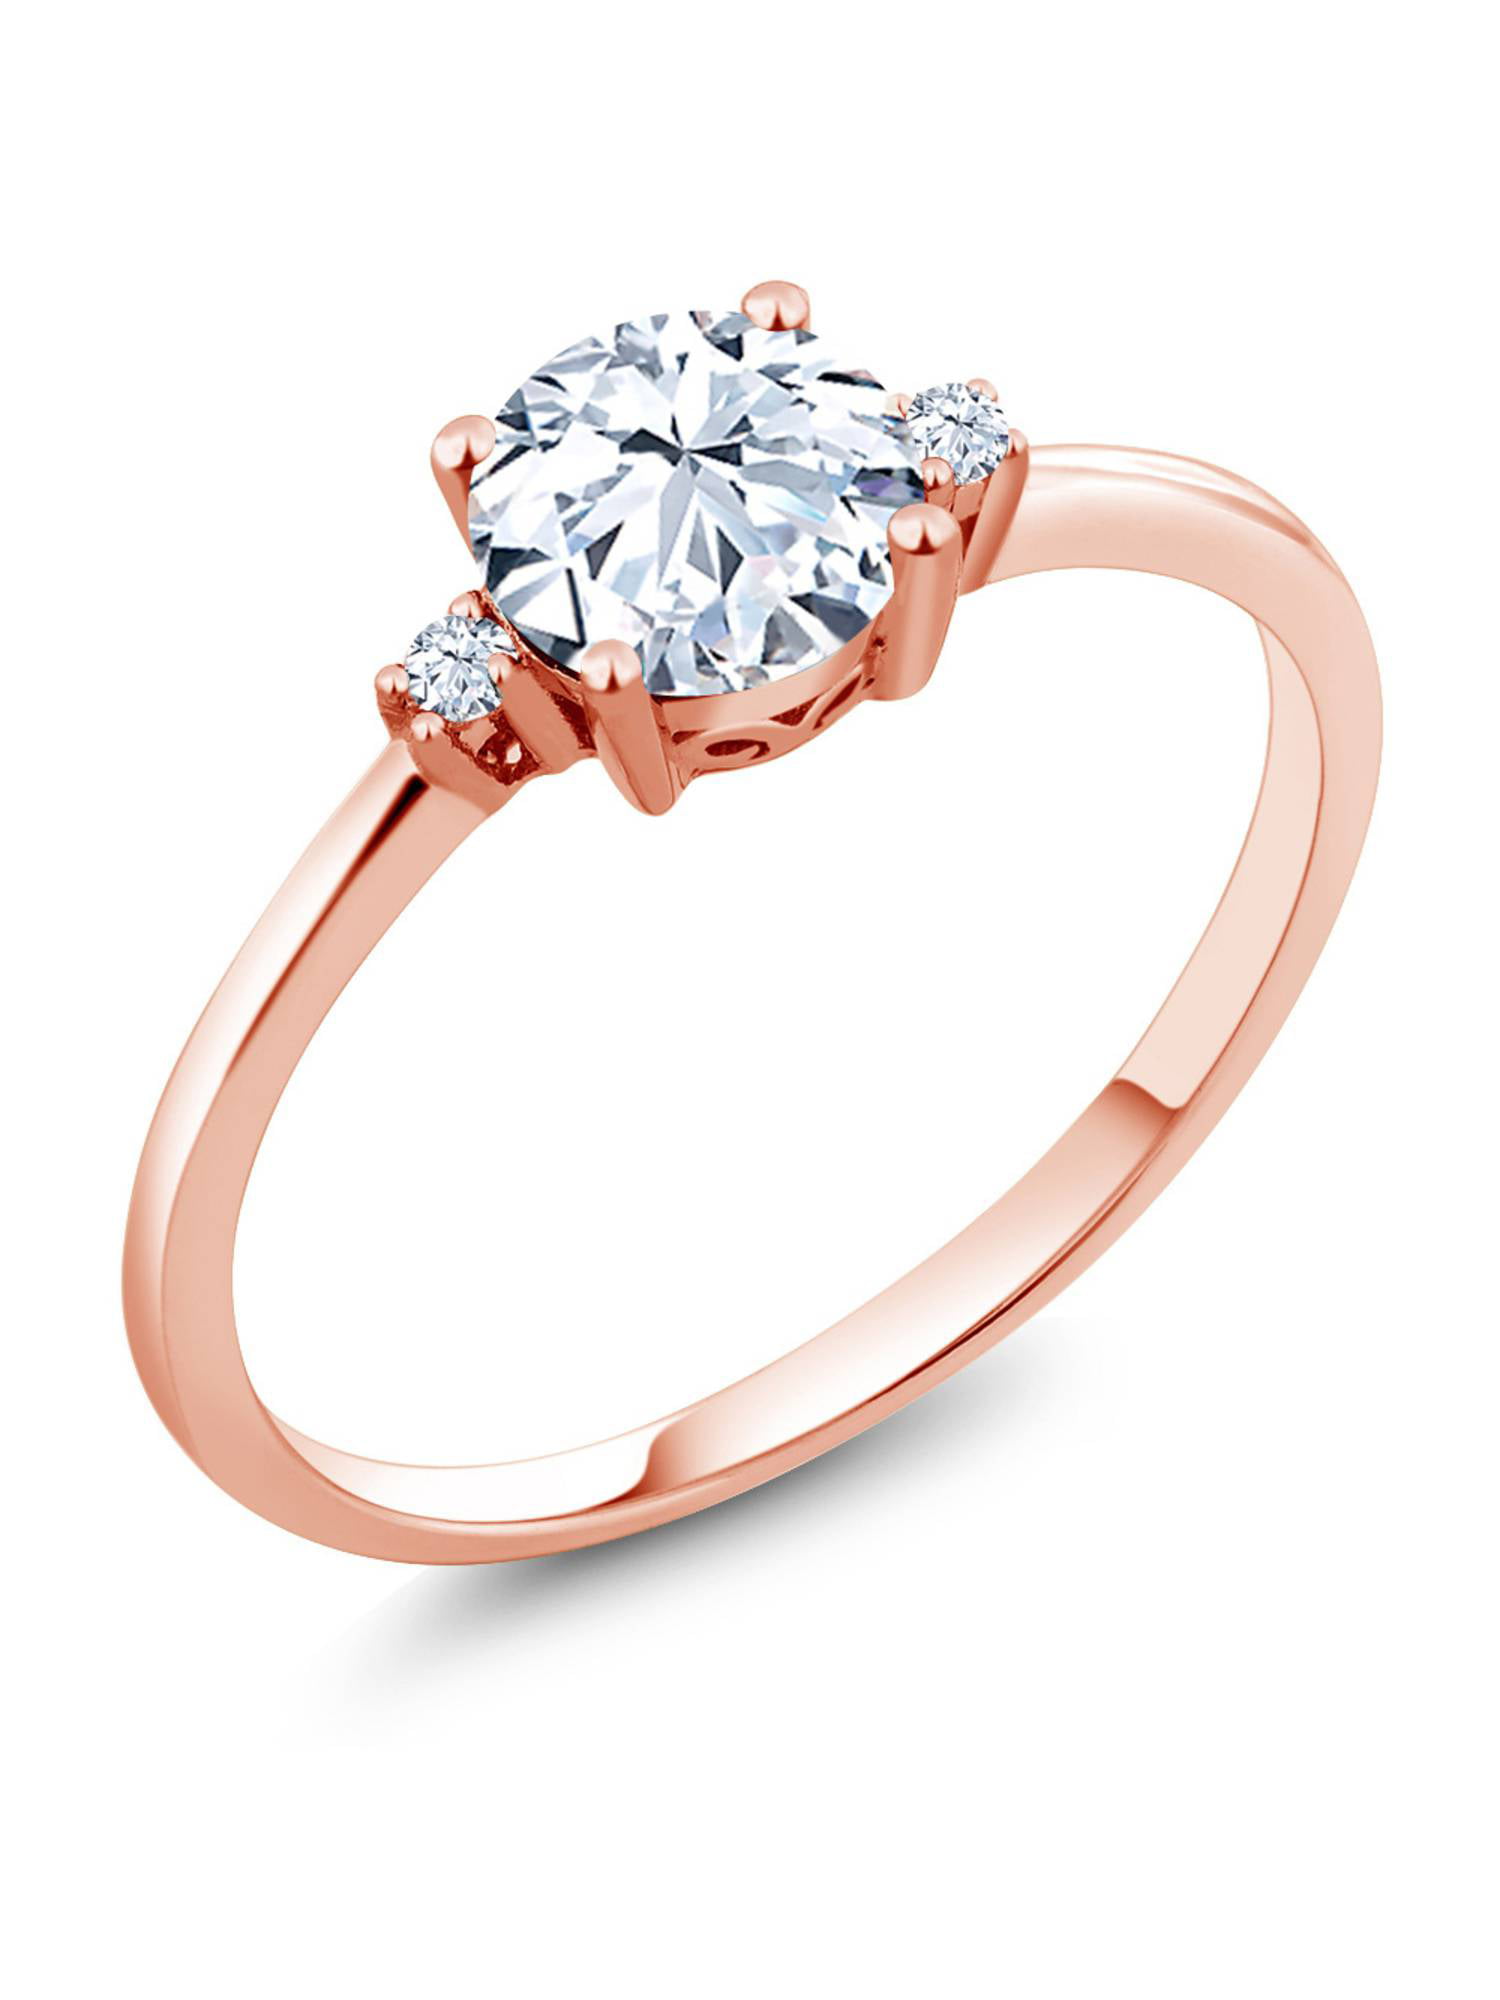 Gift for Valentine Day,Womens Day SPILOVE Serend 18k Rose Gold Plated 1.5ct Heart and Arrows Cut Cubic Zirconia Solitaire Wedding Engagement Rings